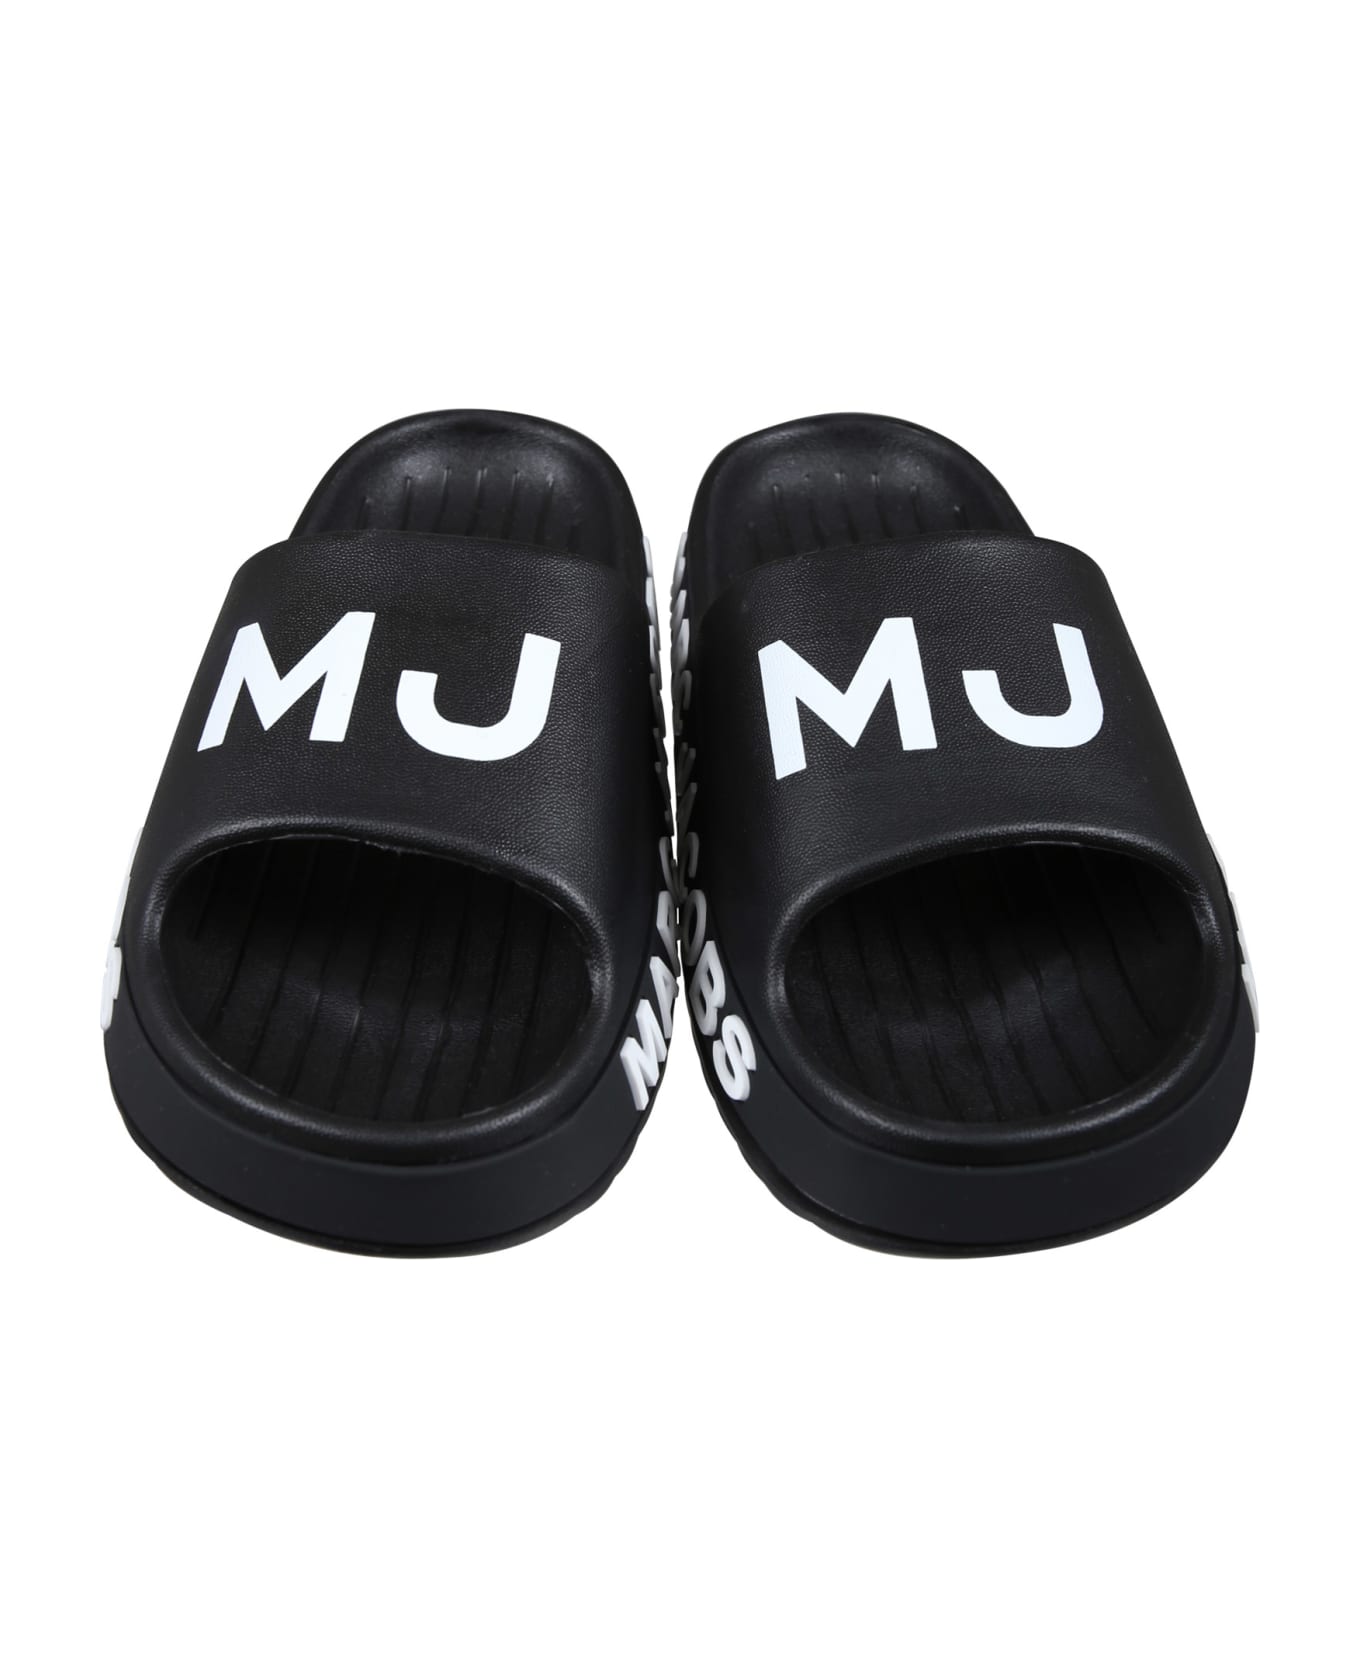 Marc Jacobs Black Slippers For Kids With Logo - Black